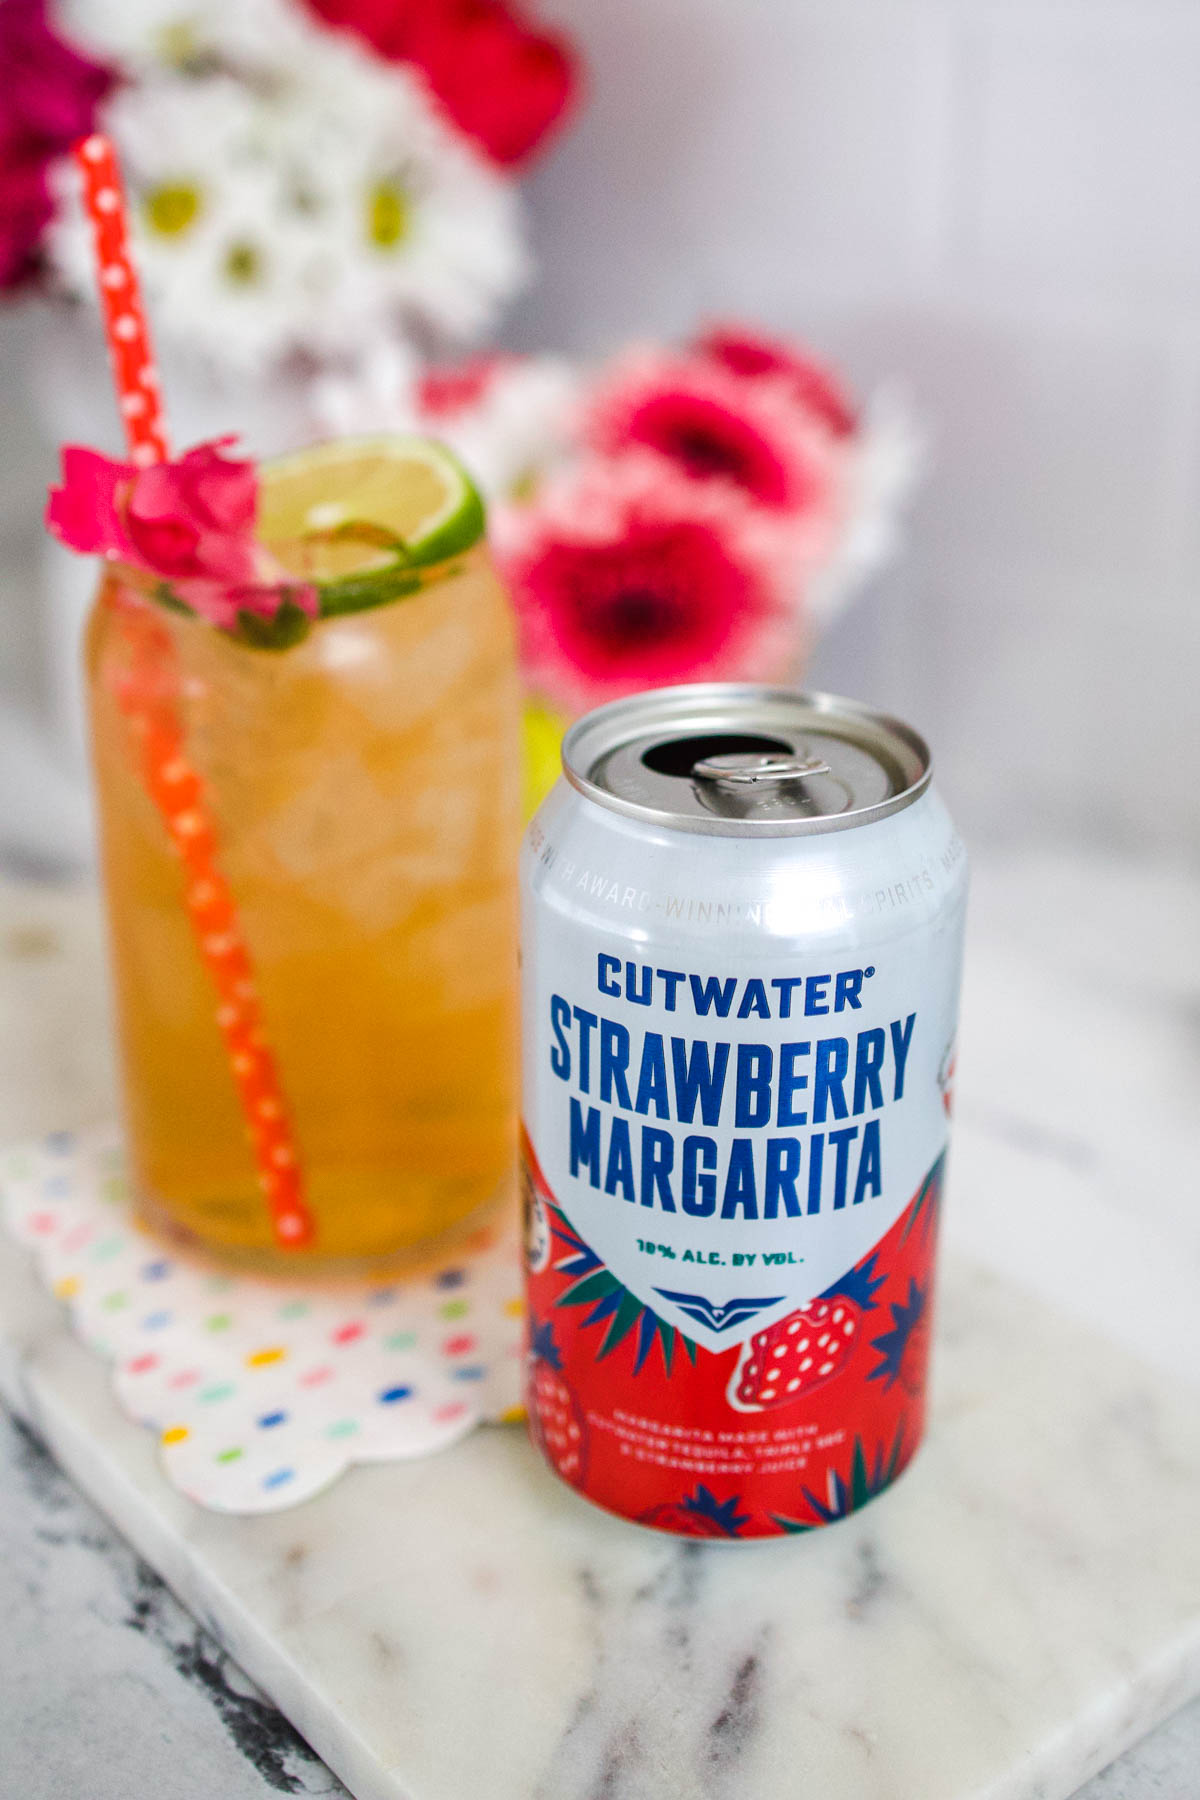 Can of Cutwater Strawberry Margarita on a table with a glass holding the cocktail behind it.